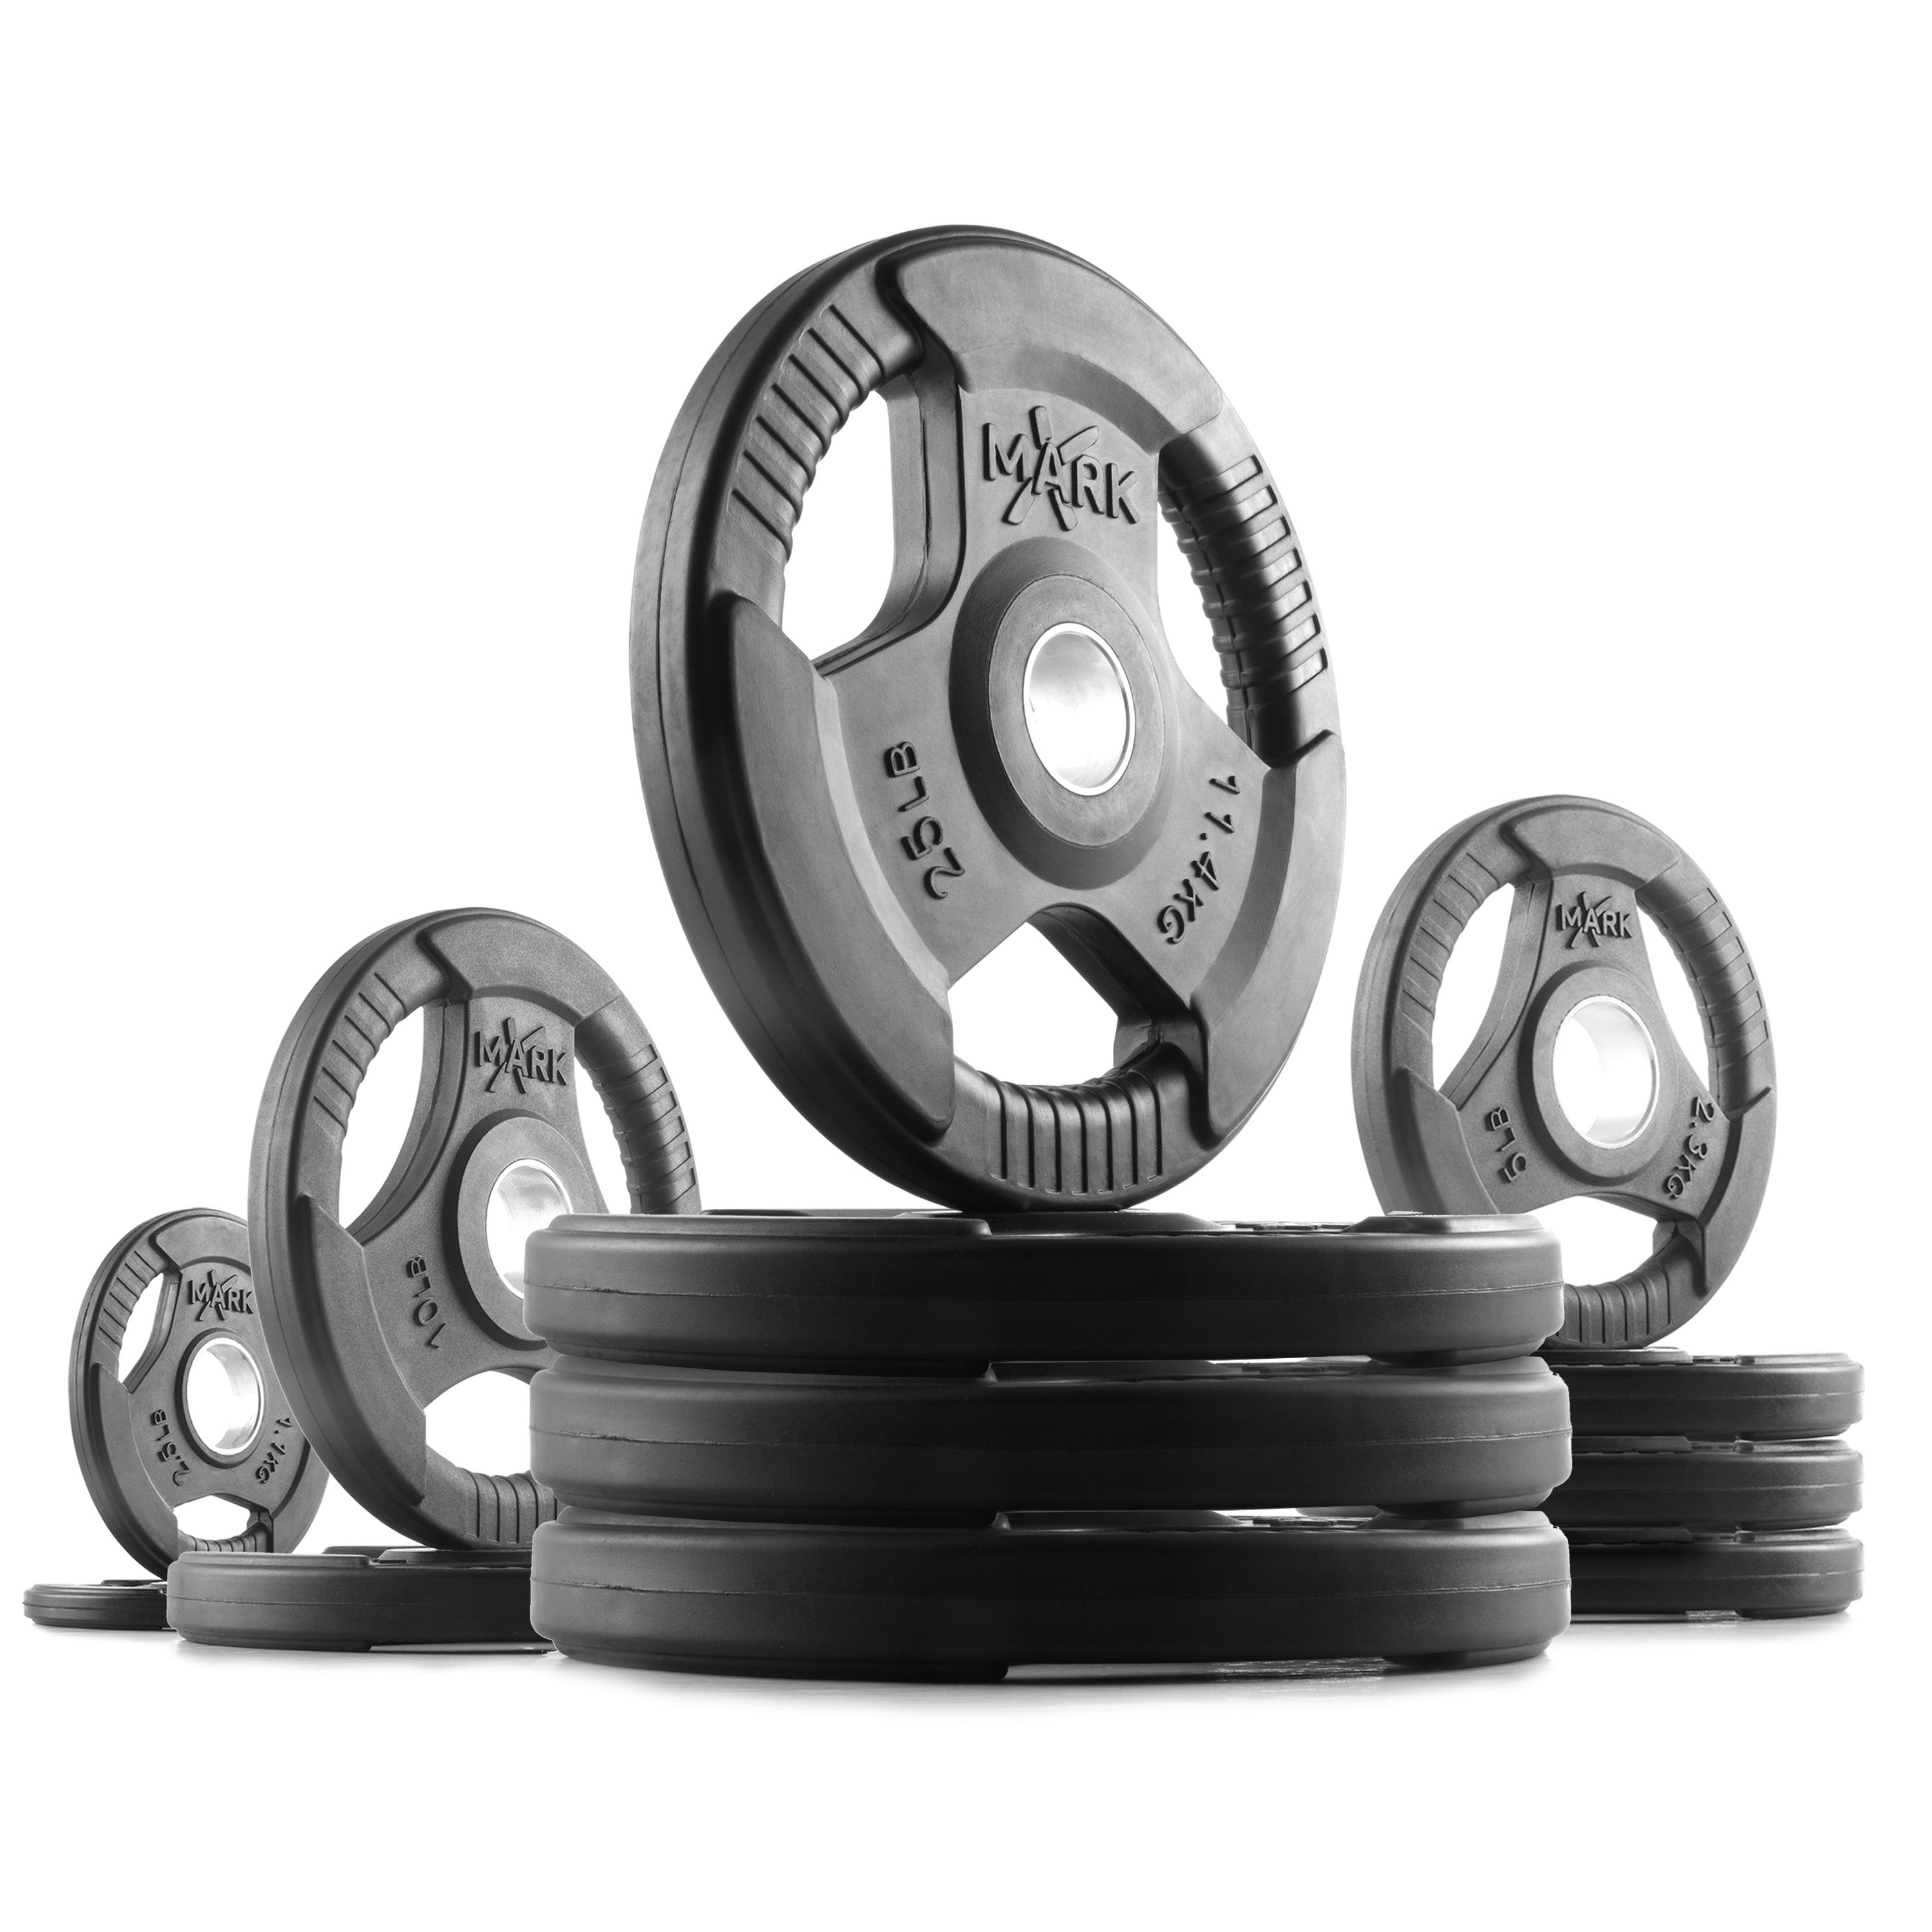 Tri Grip 145 lb Set Olympic Weights